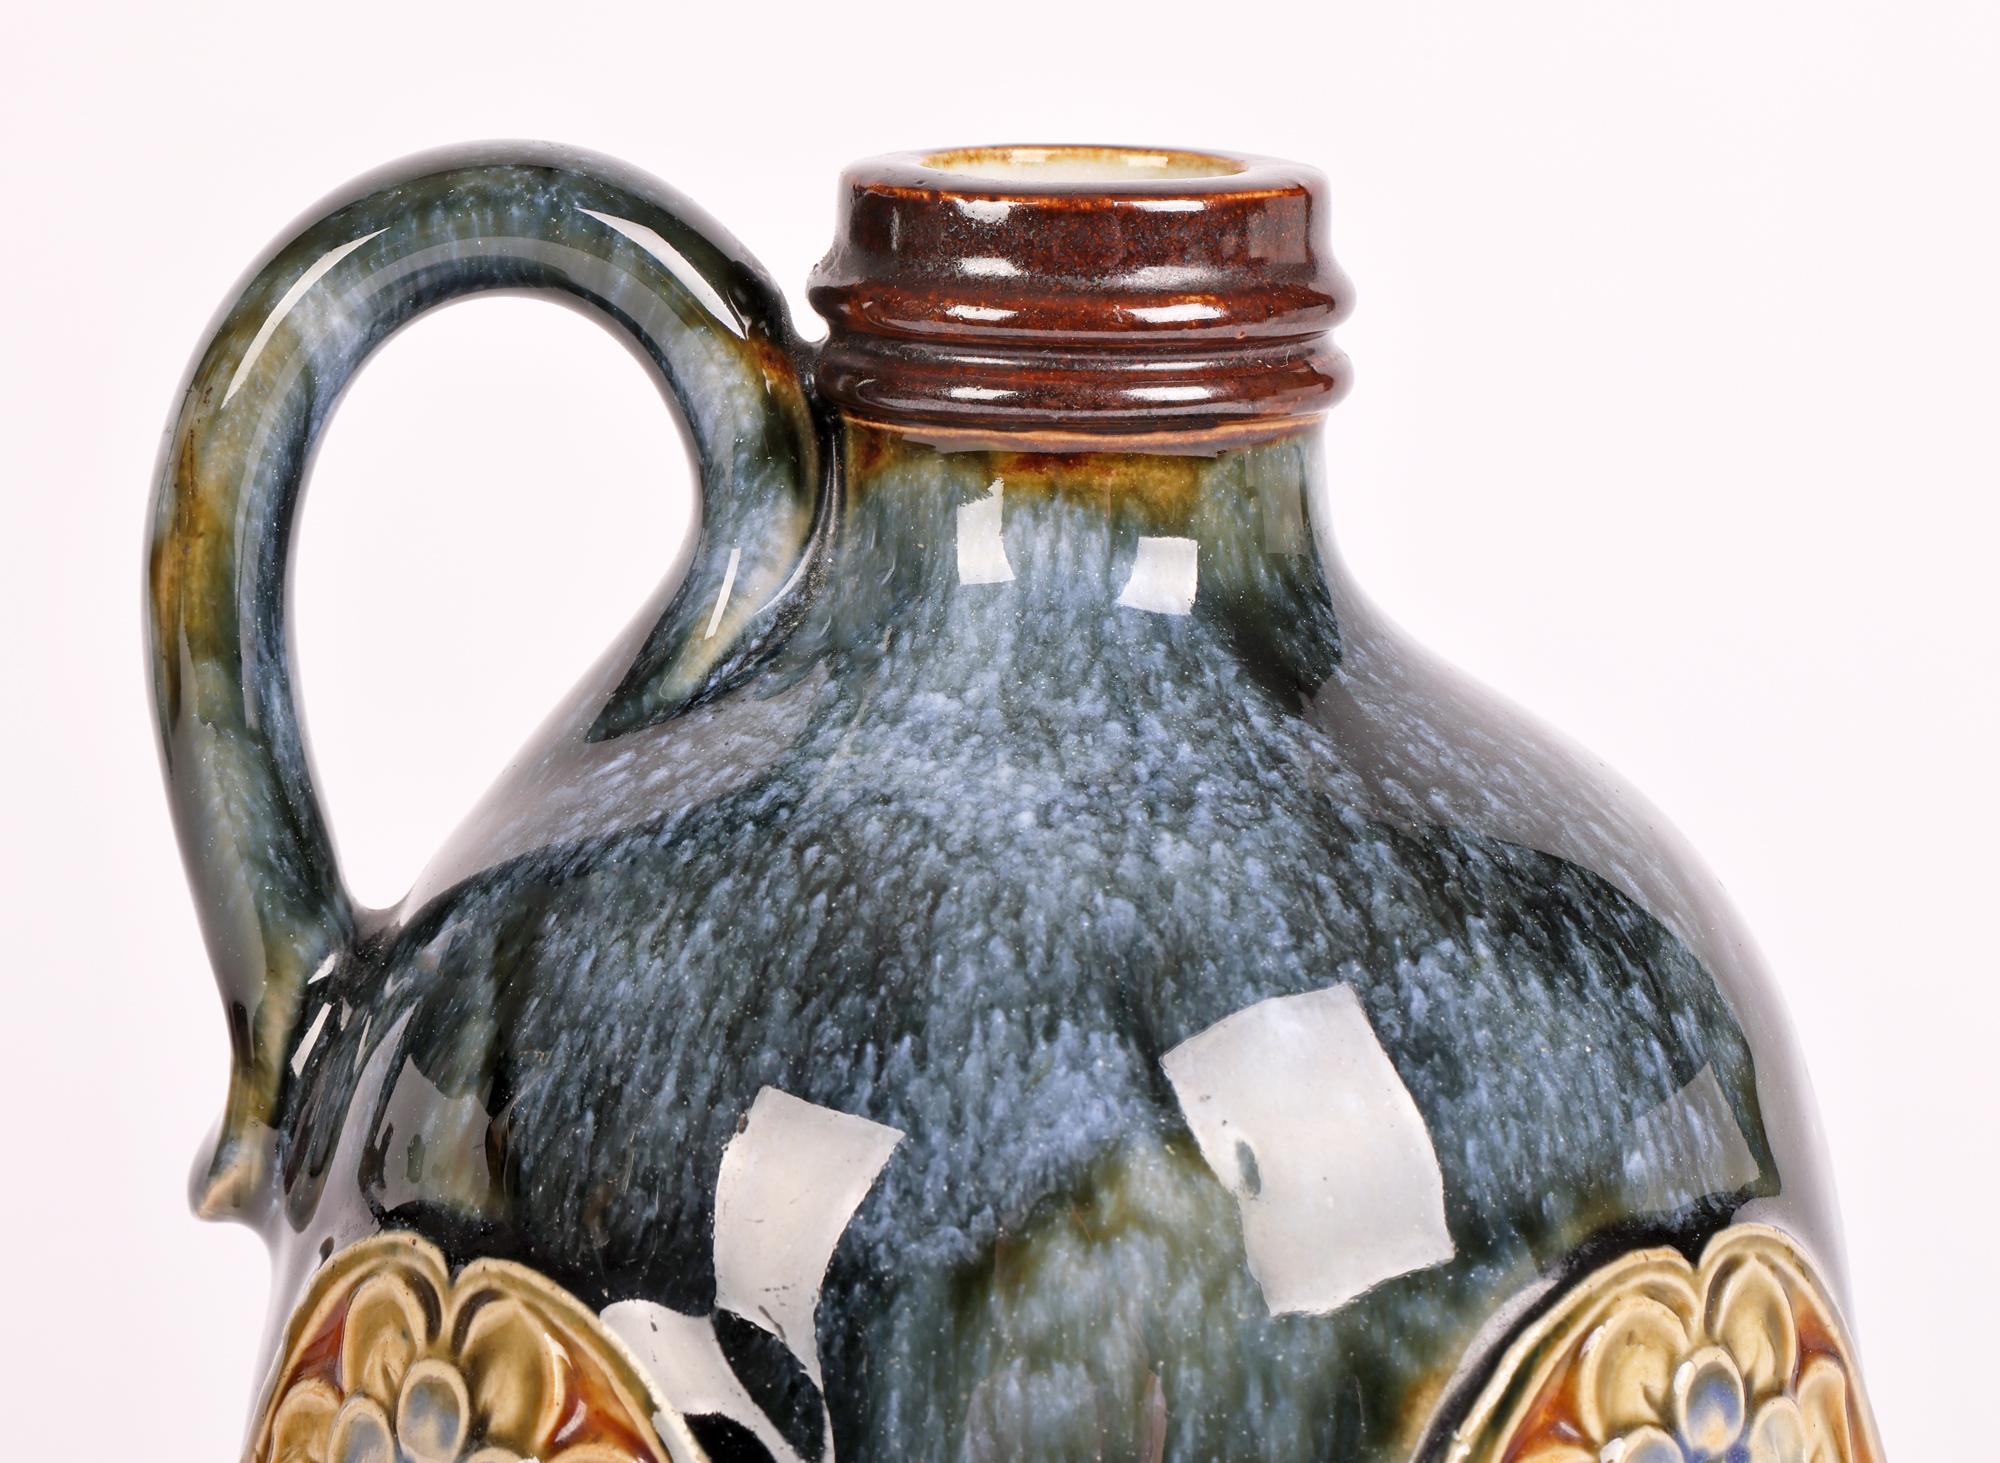 A stunning Doulton Lambeth Art Nouveau handled flask with stylized floral panels dating from around 1905. The stoneware flask is of gourd or pear shape standing on a flat narrow round base with a wide lower body and narrow shaped upper body with a